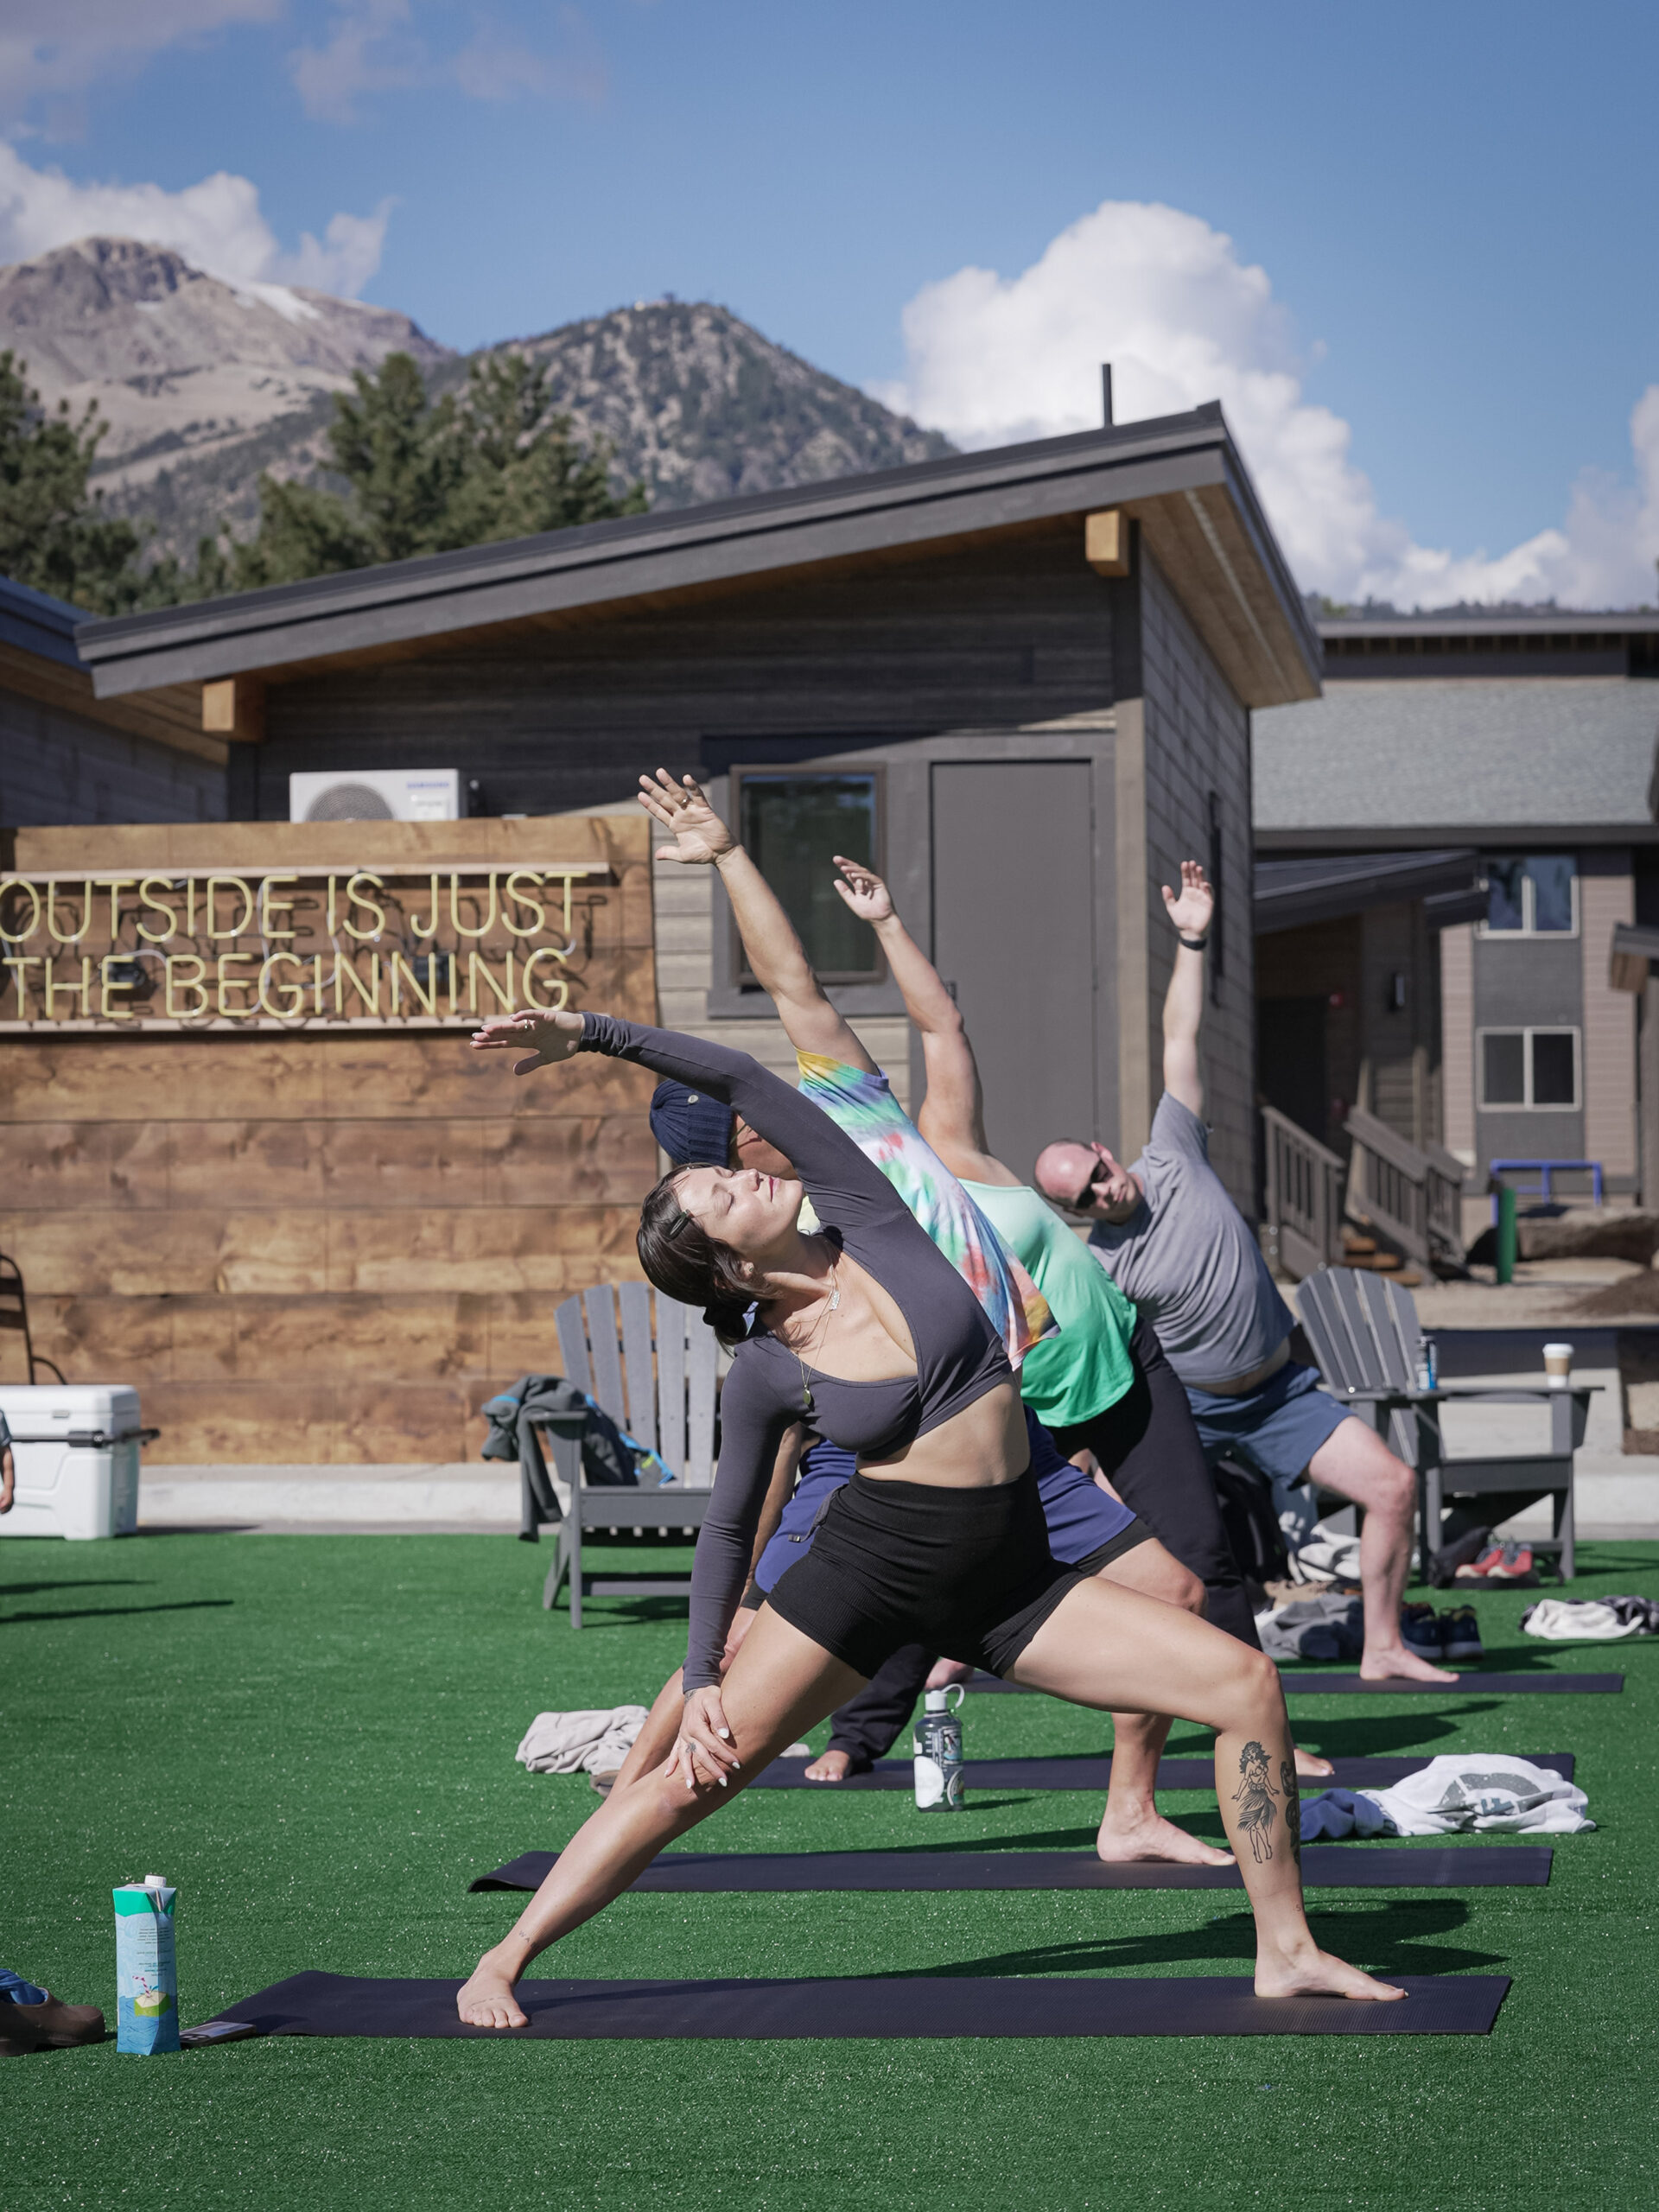 People practice yoga on mats in an open field, embracing a tranquil outdoor experience.